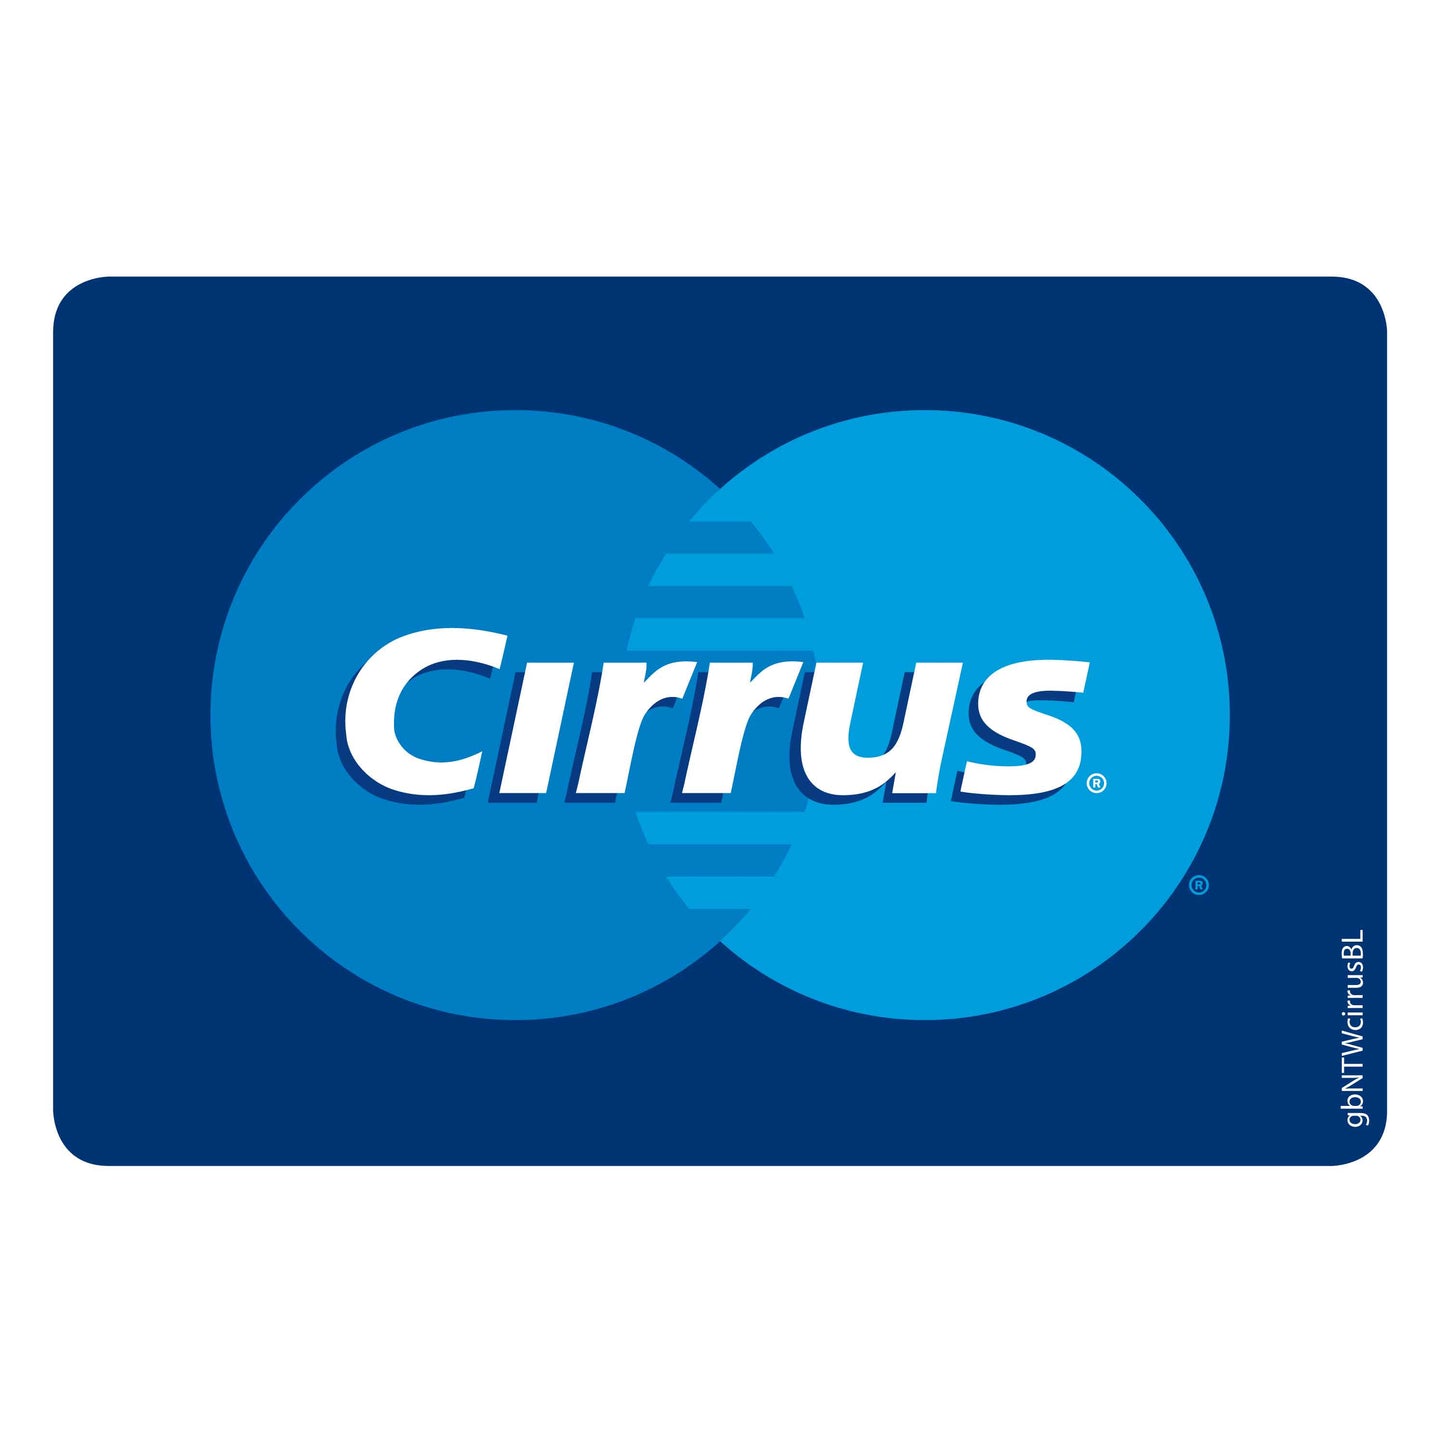 Single Network Decal, Cirrus Network. 3 inches by 2 inches in size.